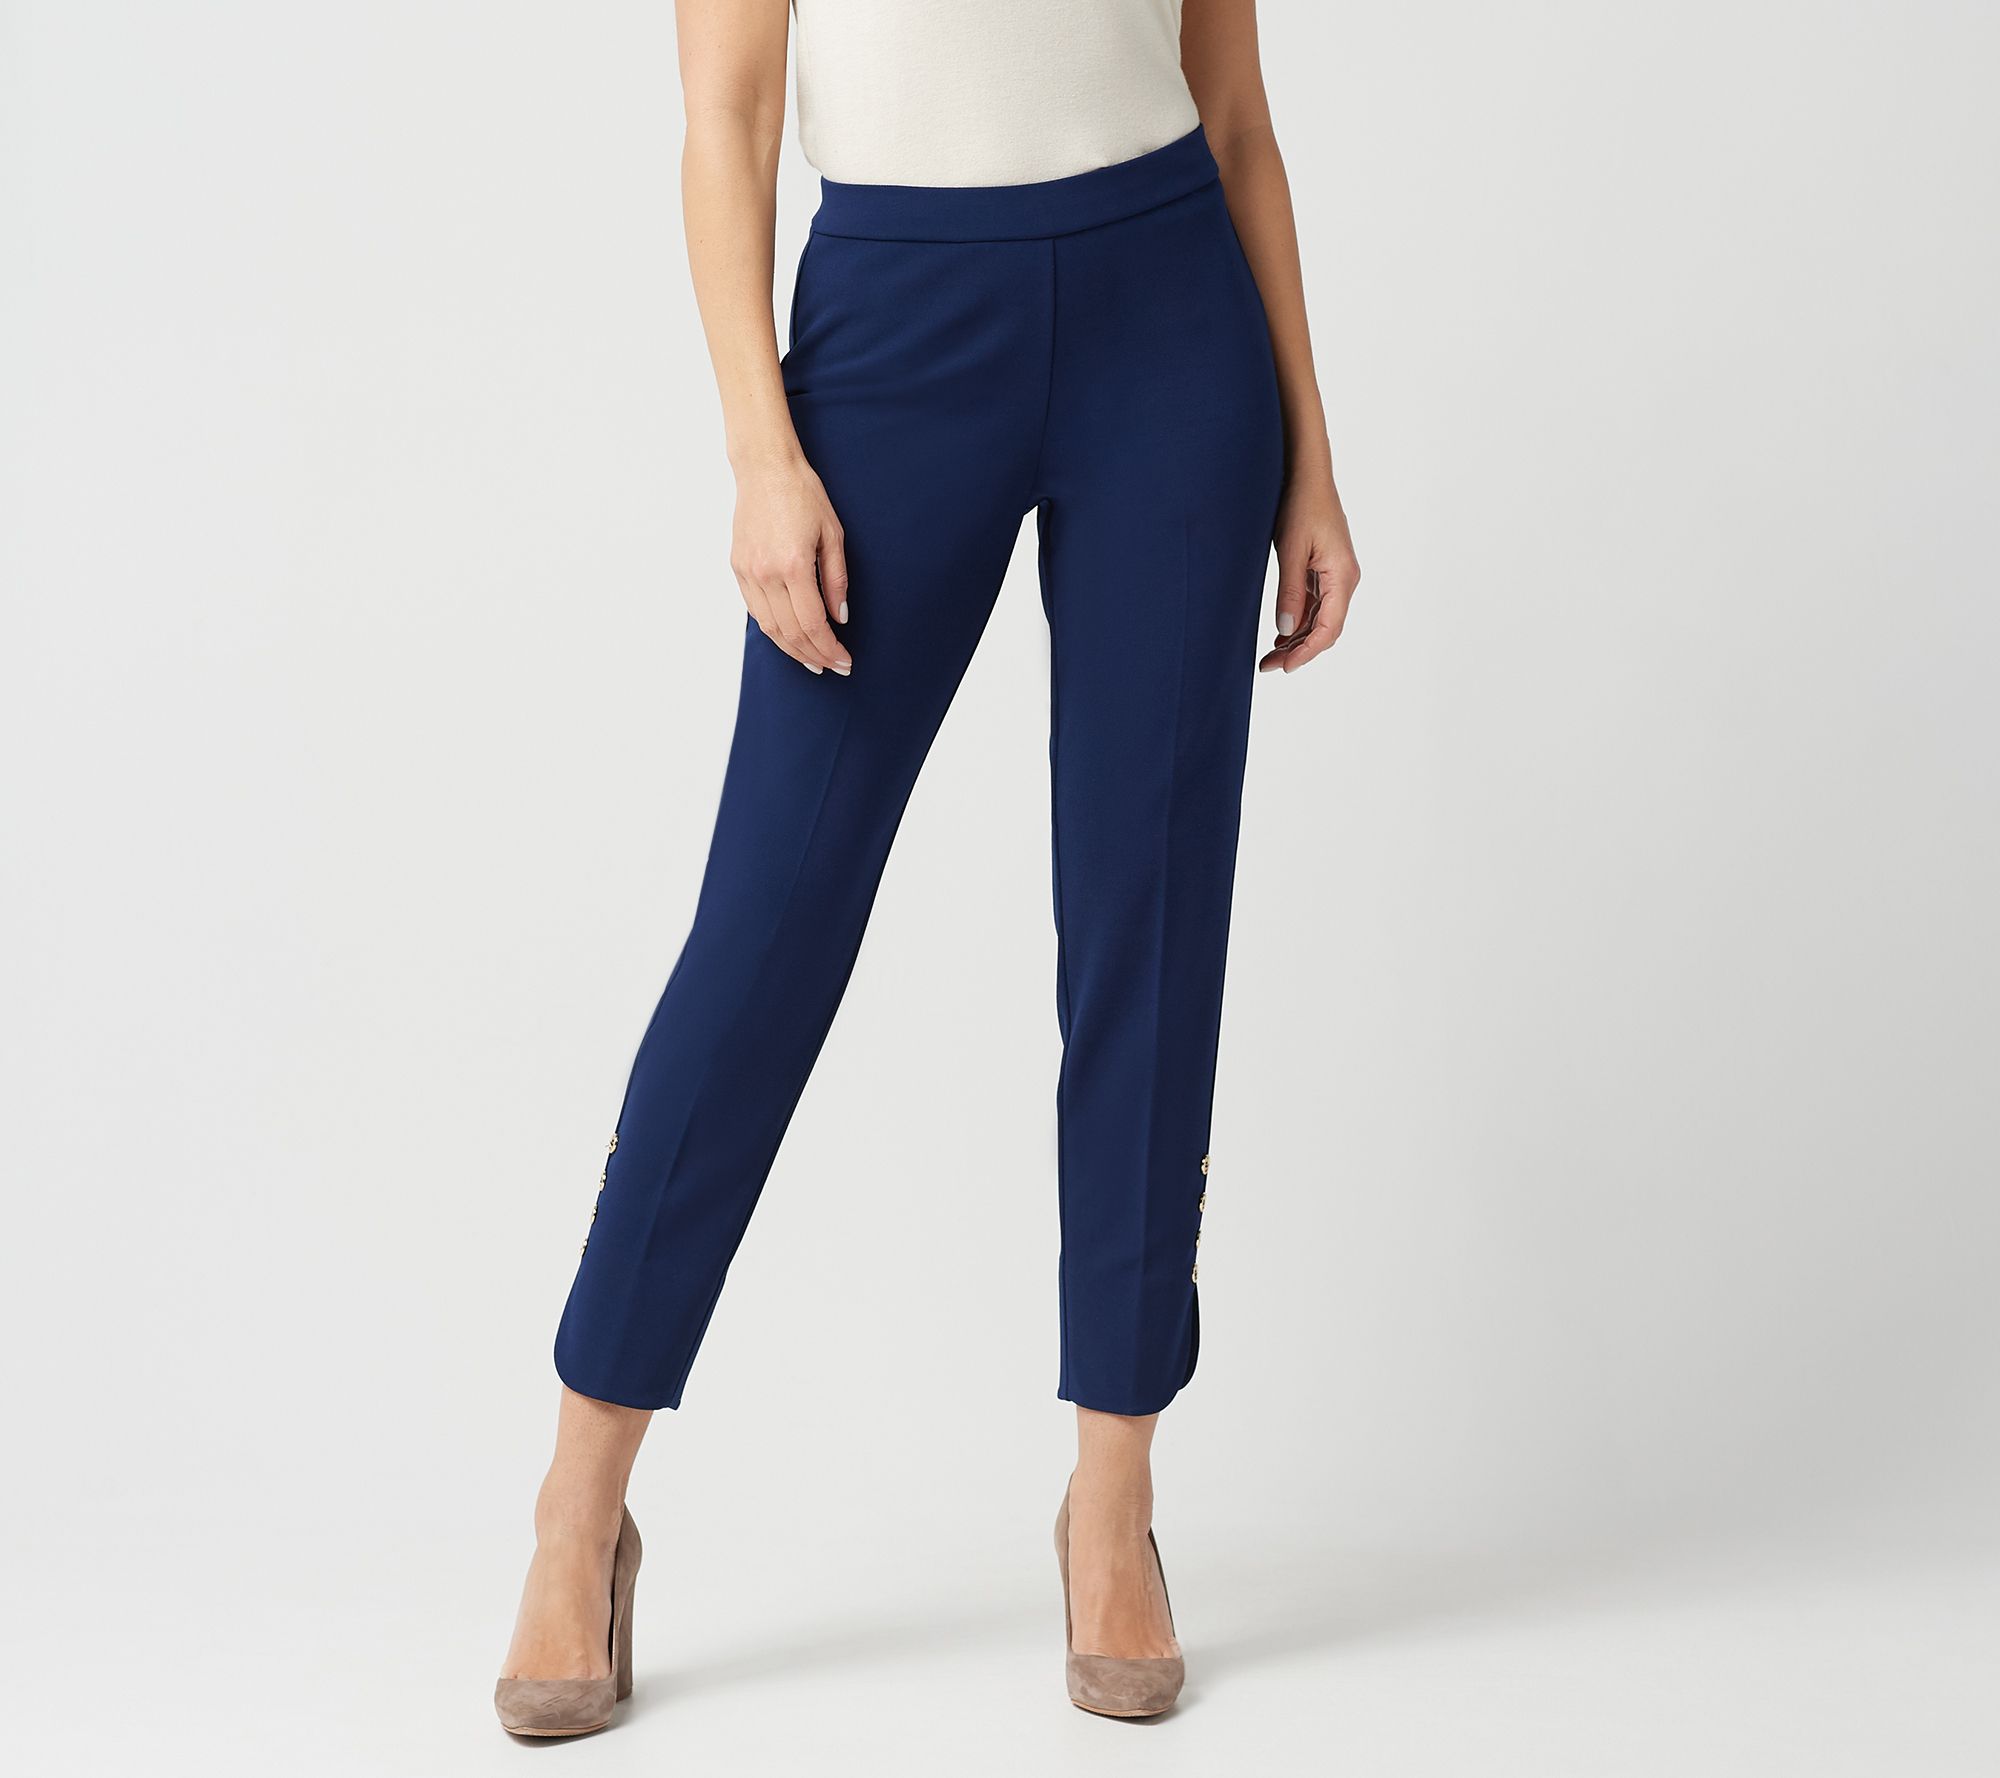 Dennis Basso Luxe Crepe Pull-On Ankle Pants with Tulip Hem - QVC.com